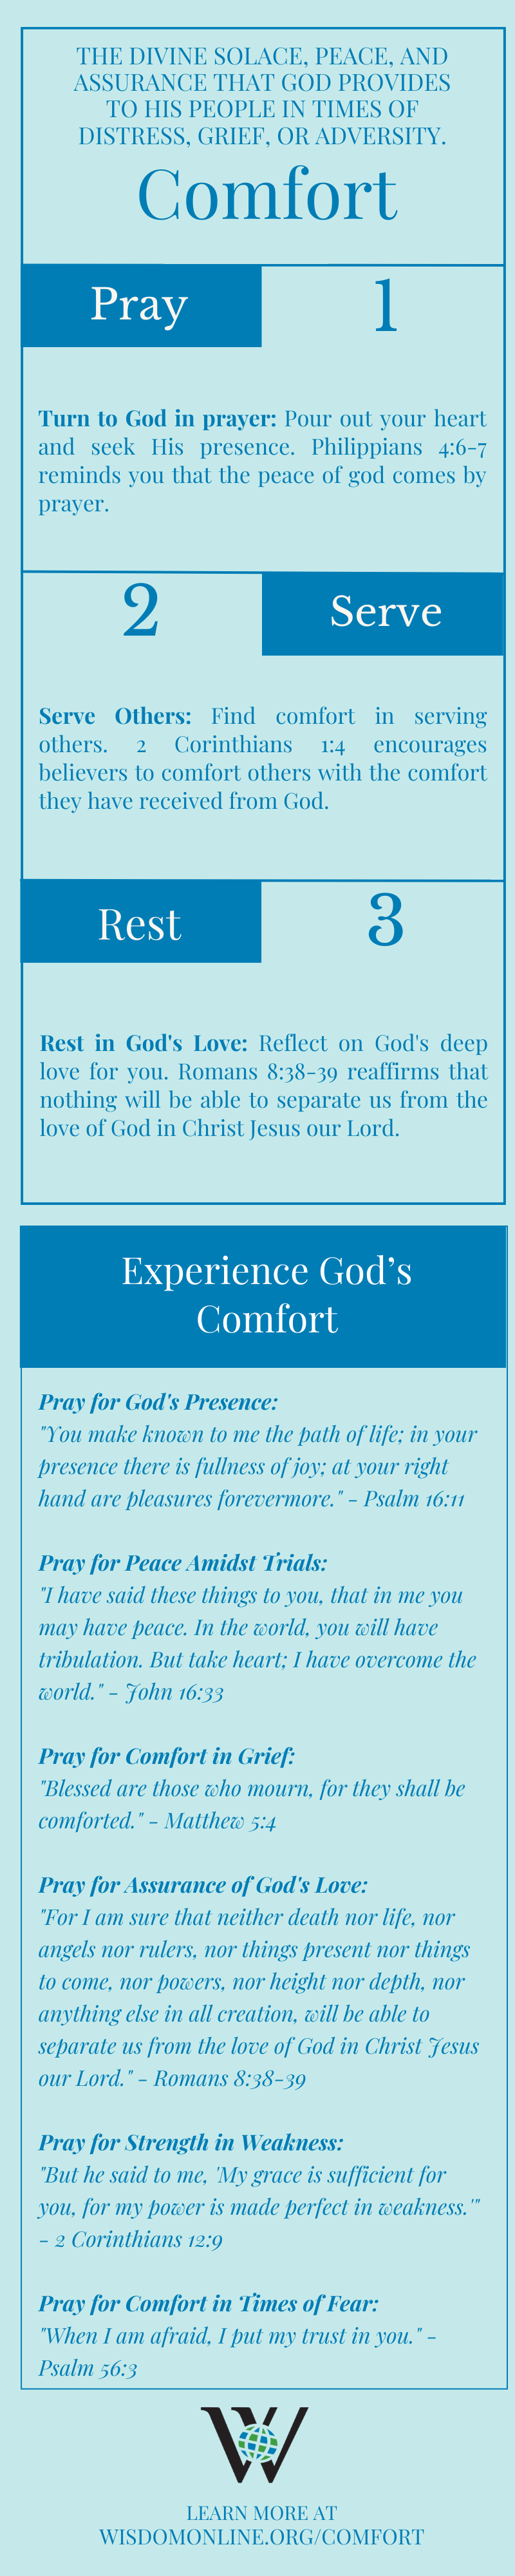 Infographic on the Biblical reality of God's comfort